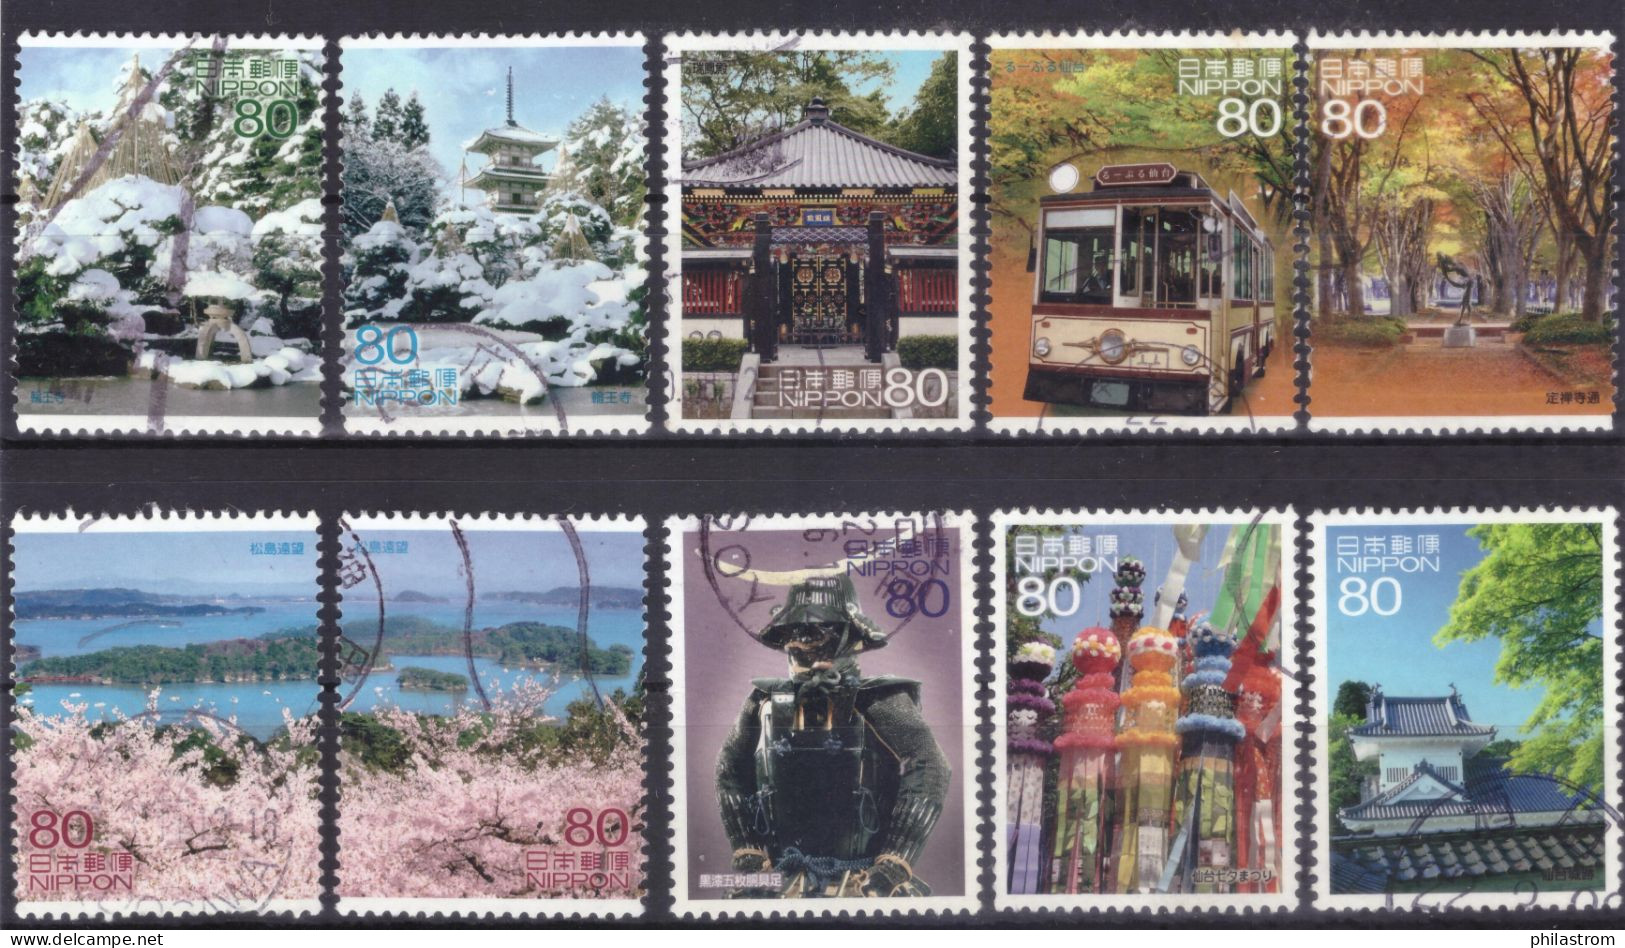 Japan - Japon - Used - Scenery Of The Trip 7 (NPPN-0956) - Usati